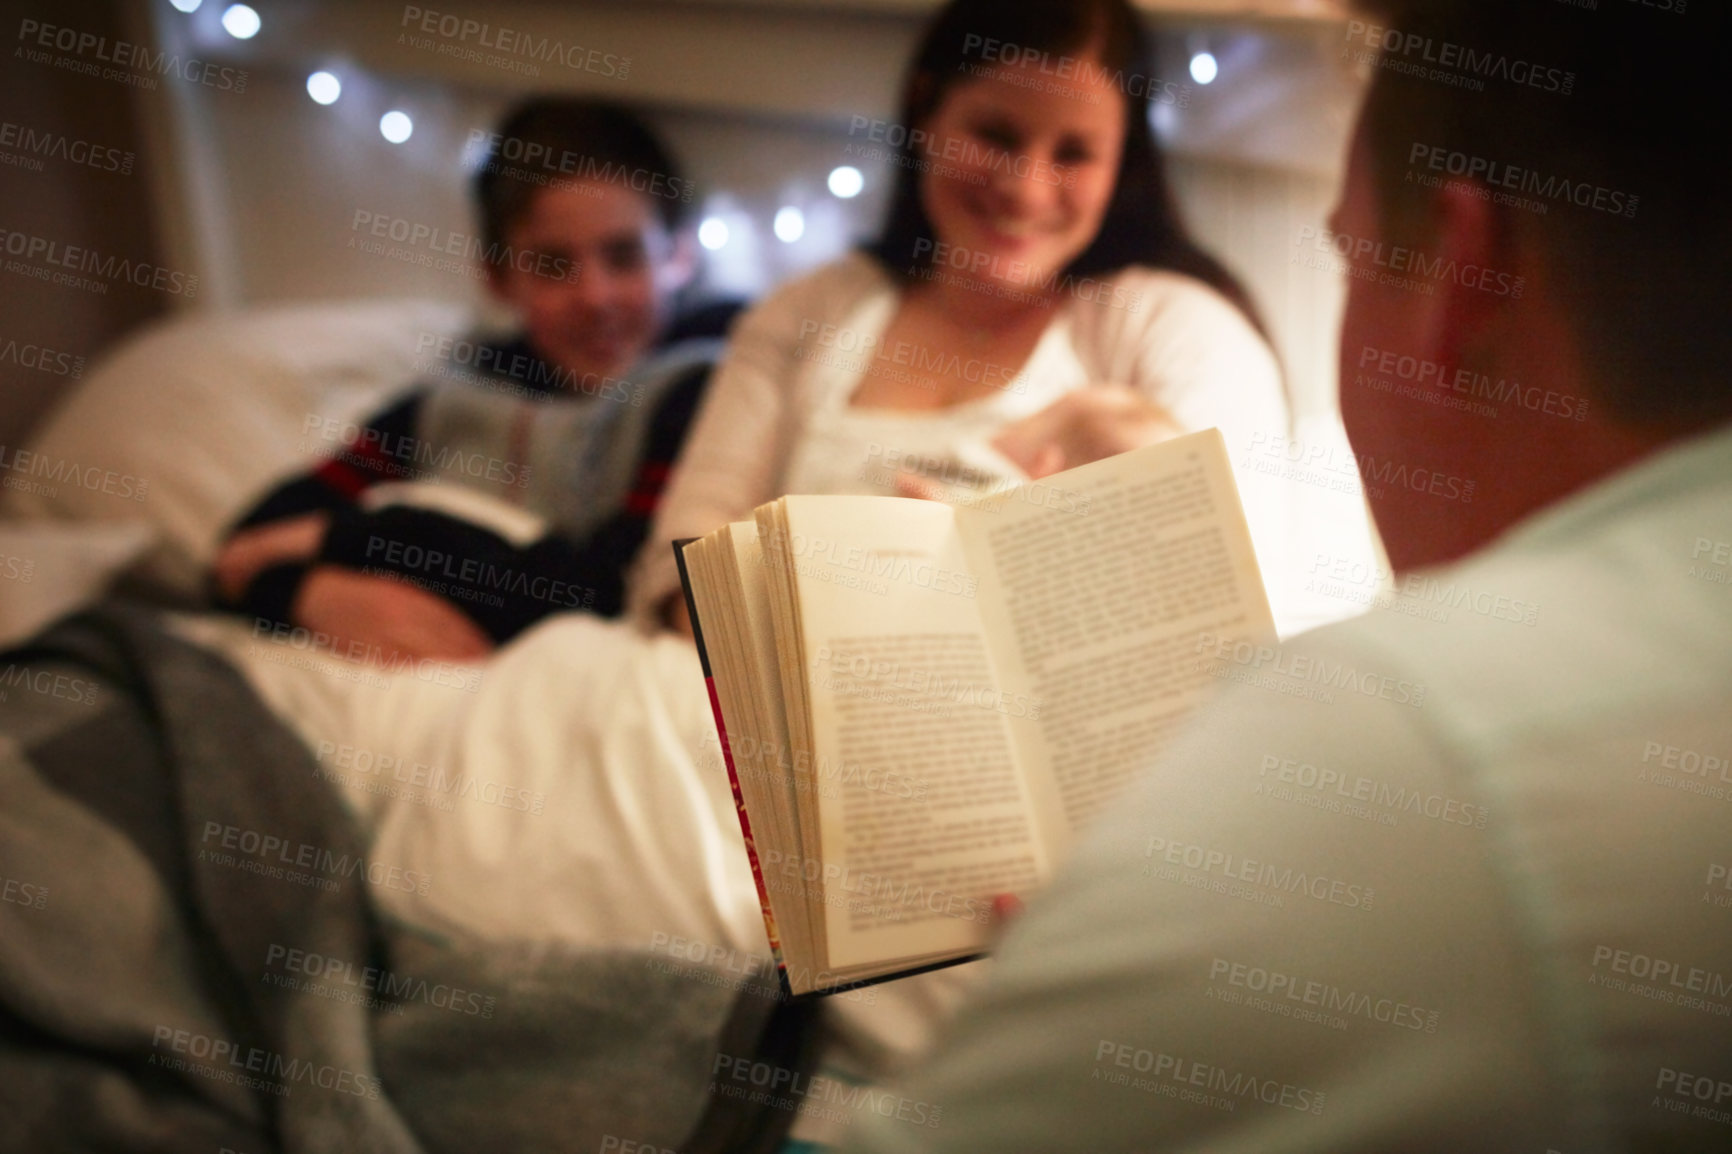 Buy stock photo Cropped shot of a father reading a bedtime story to his wife and son